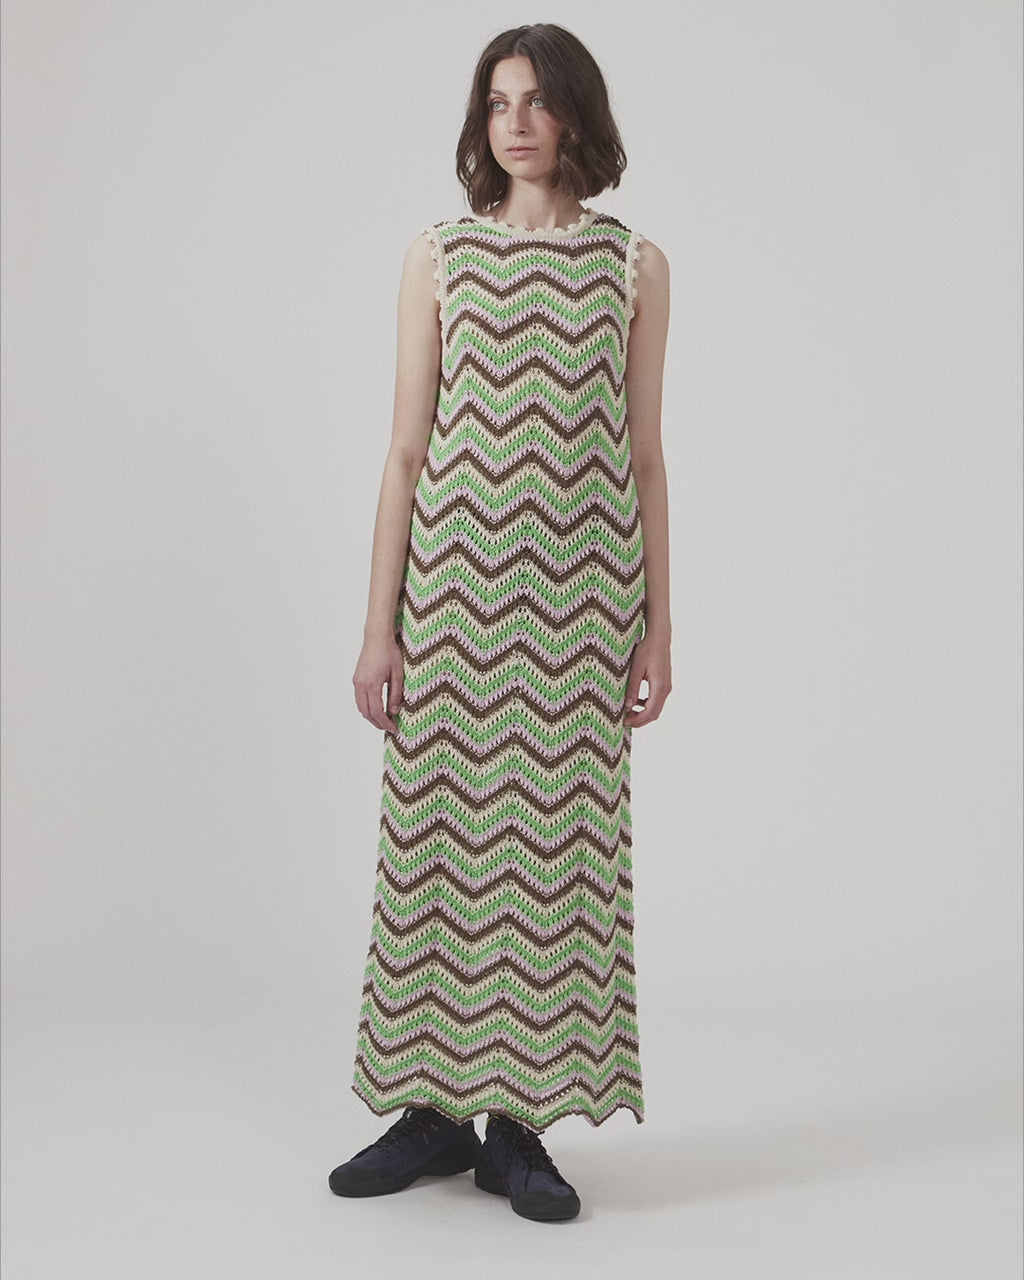 Long sleeveless dress in a multicolored organic cotton crochet. CaryMD dress has detailed trimmings and a deep v-neckline in the back. The model is 177 cm and wears a size S/36.